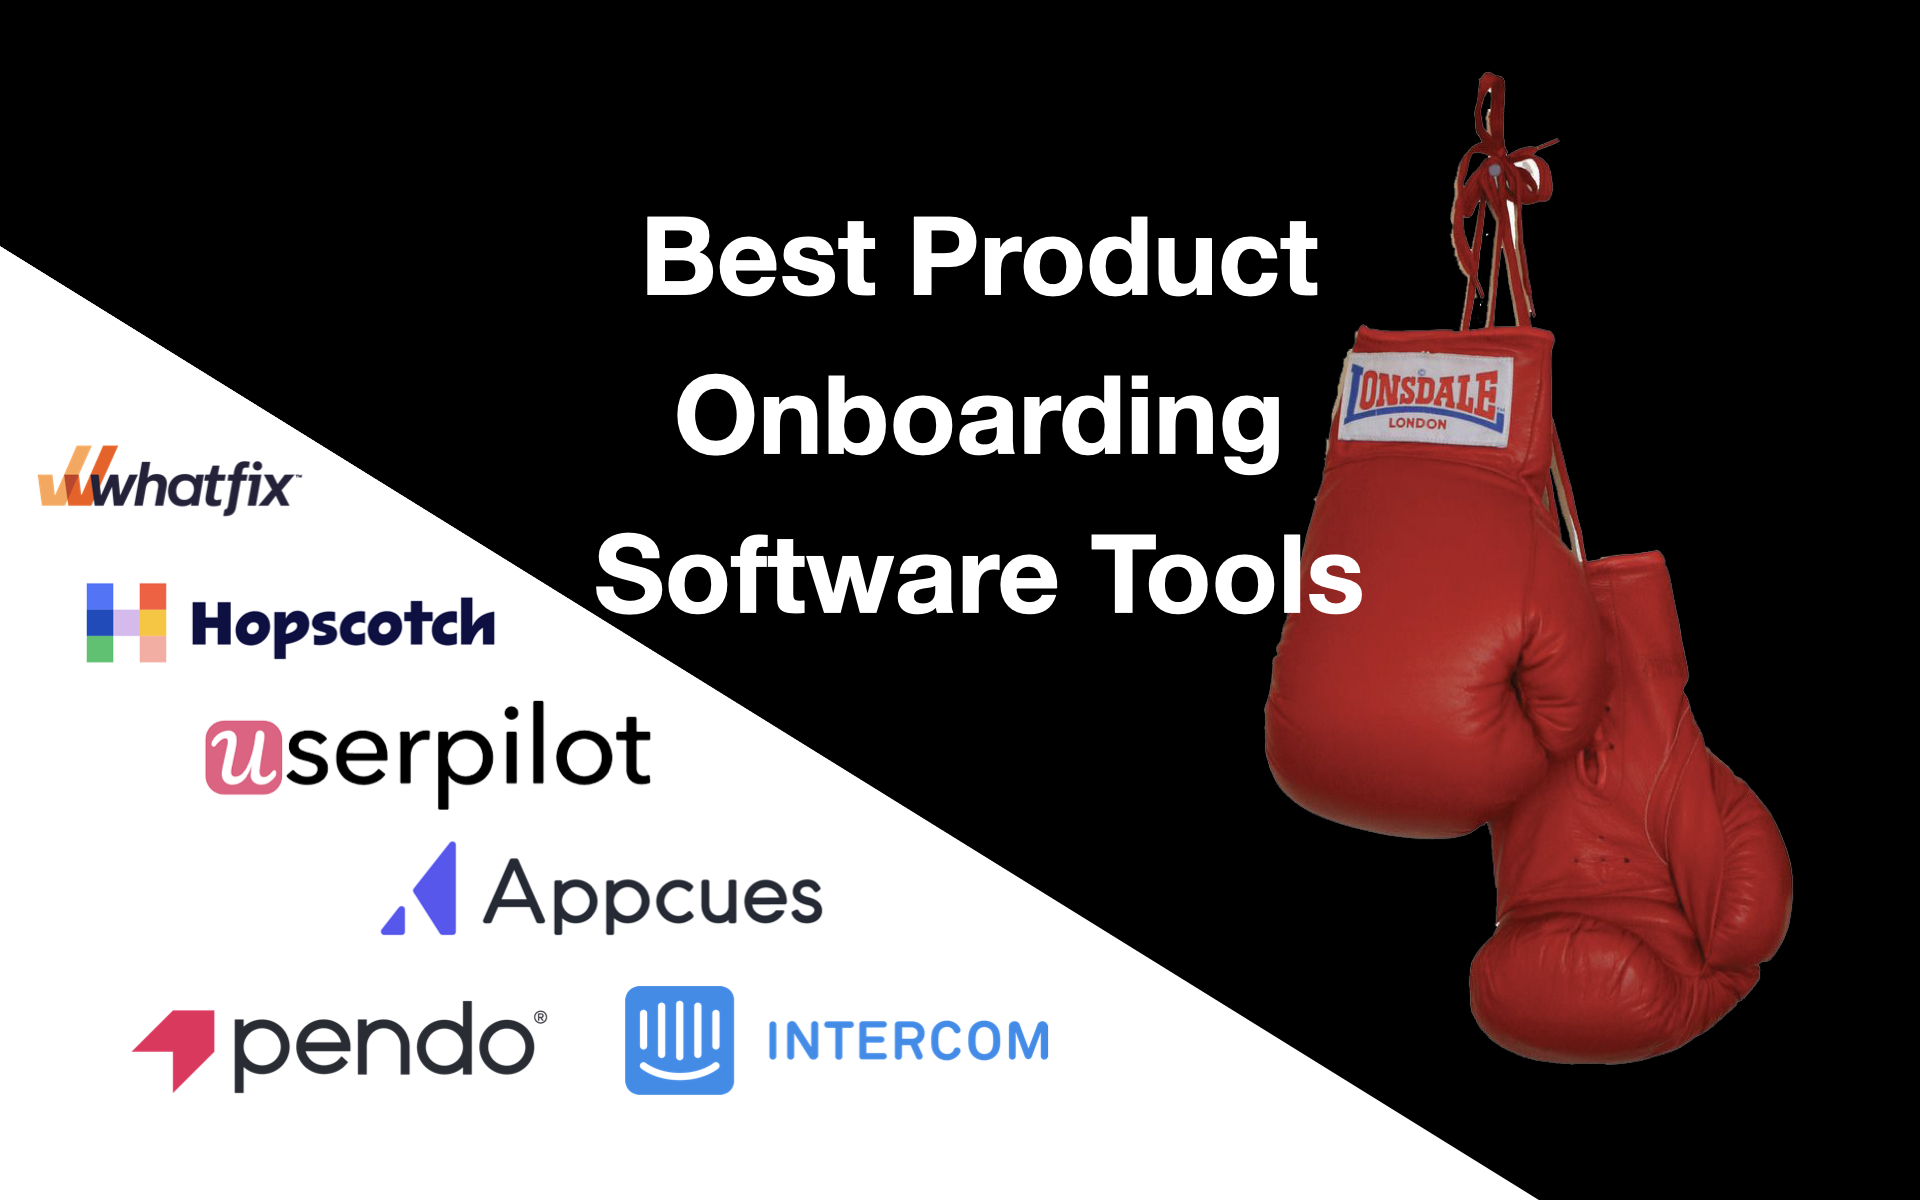 The 7 Best Product Onboarding Software Tools